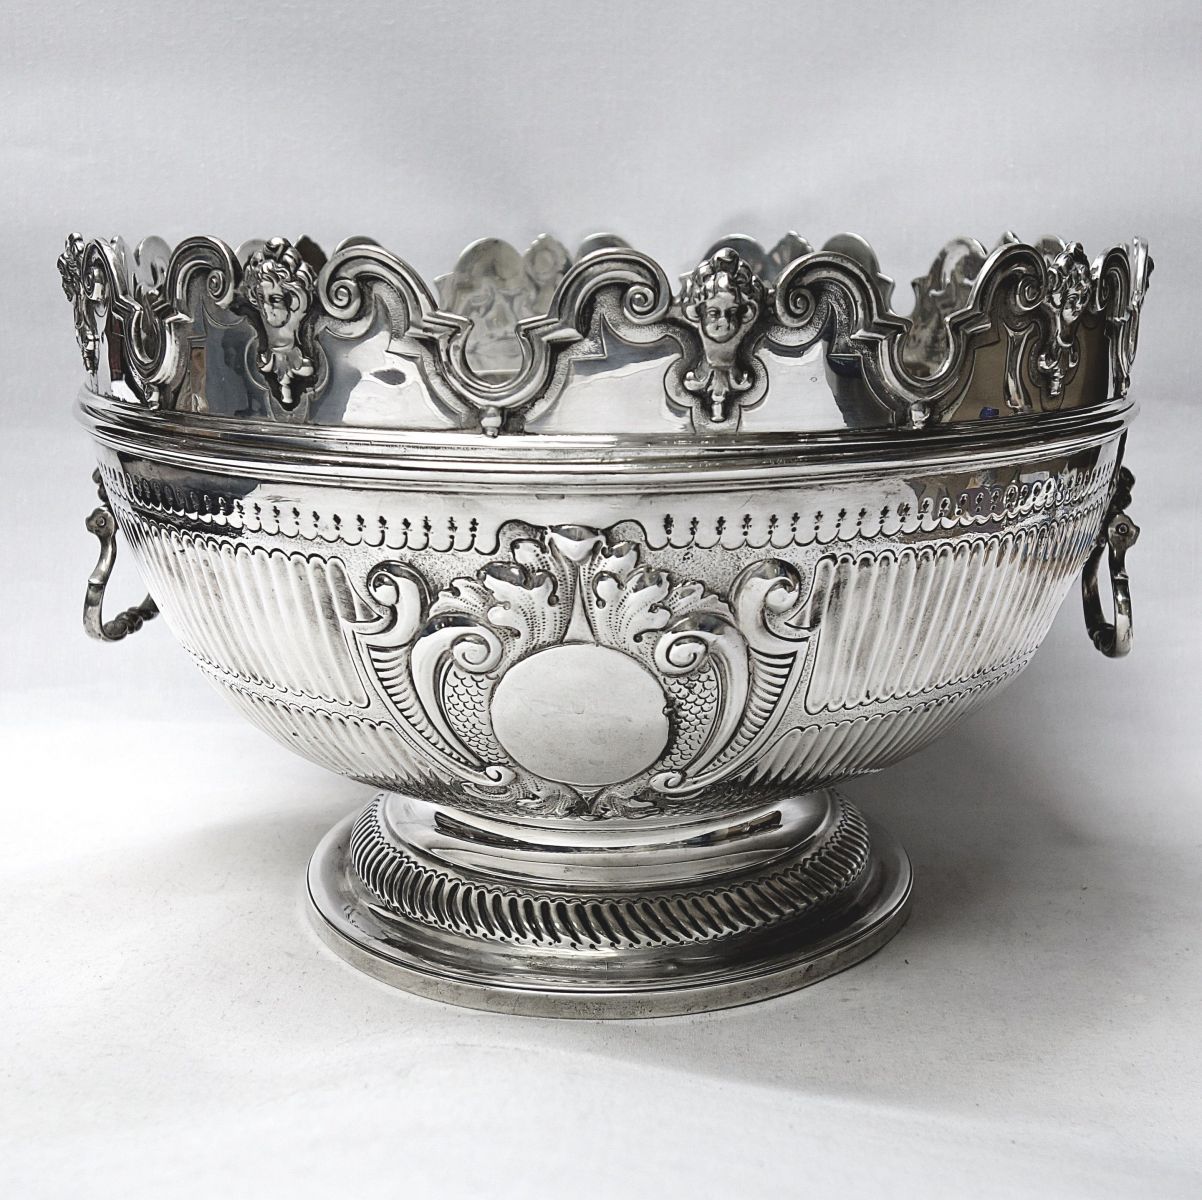  Antique Queen Anne Style Silver Monteith Bowl